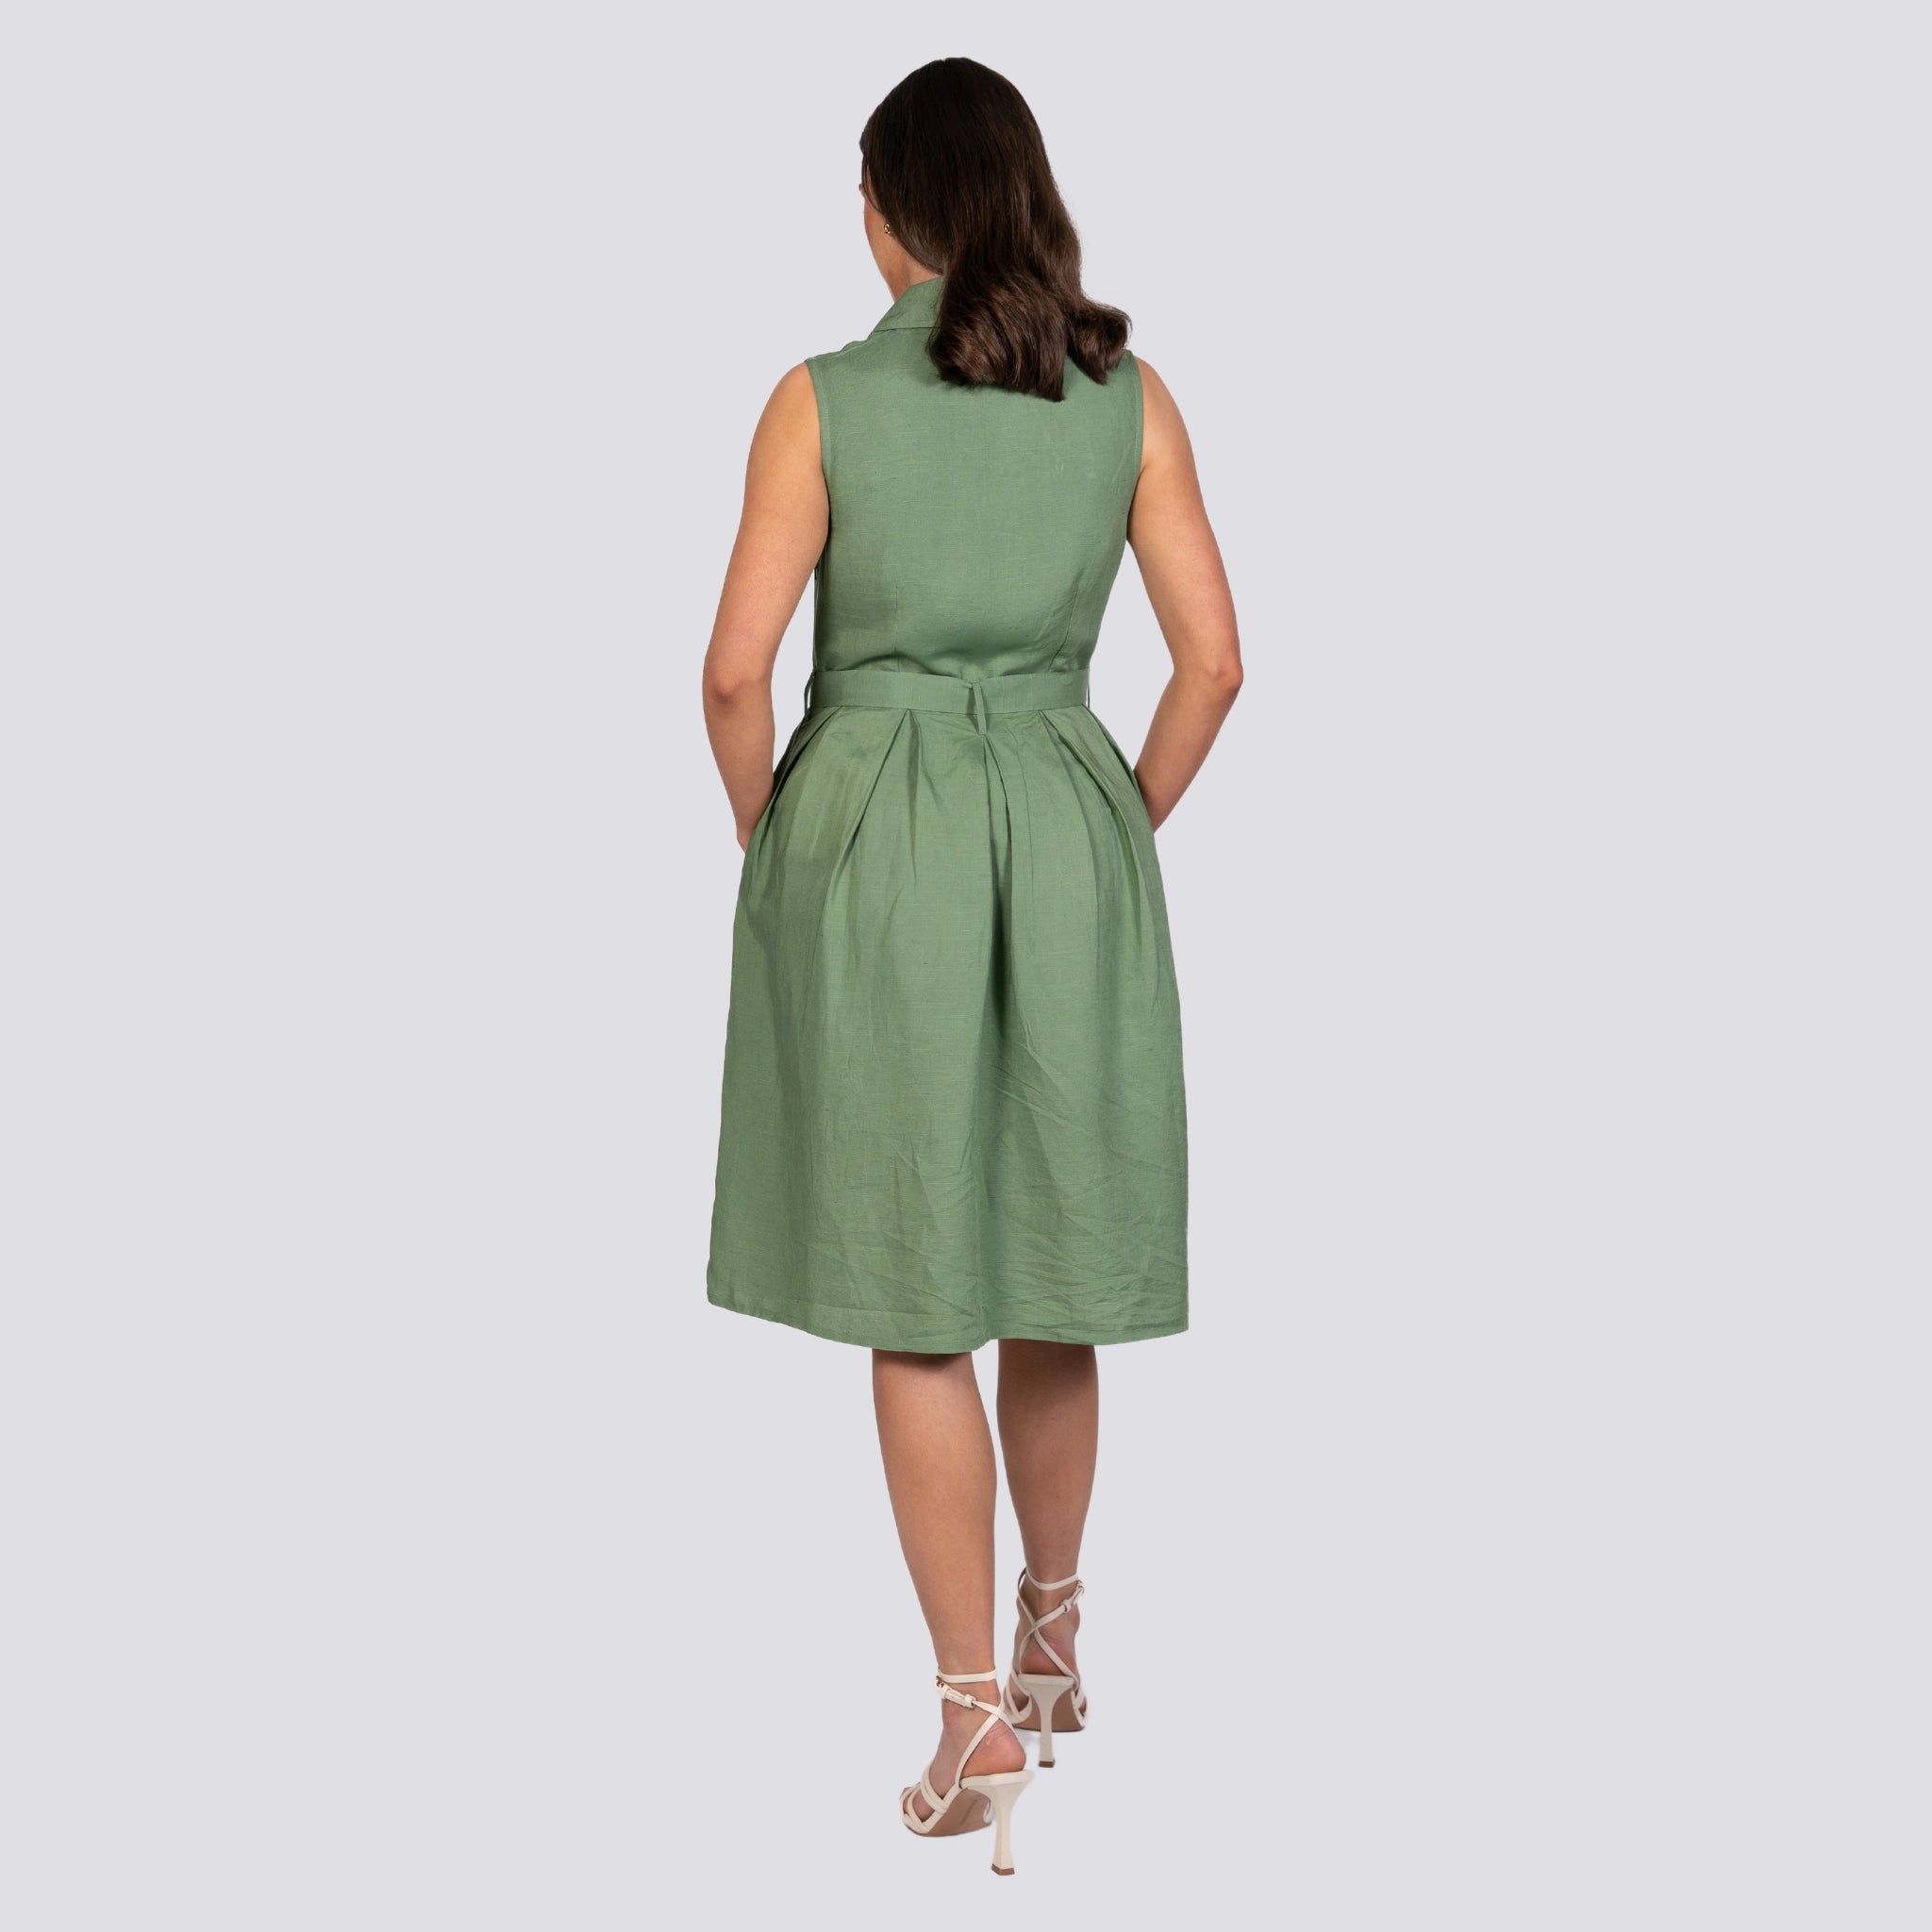 Woman standing with her back to the camera, wearing a Karee green Vintage Midi Button-Up Dress and cream strappy heels, against a plain background.